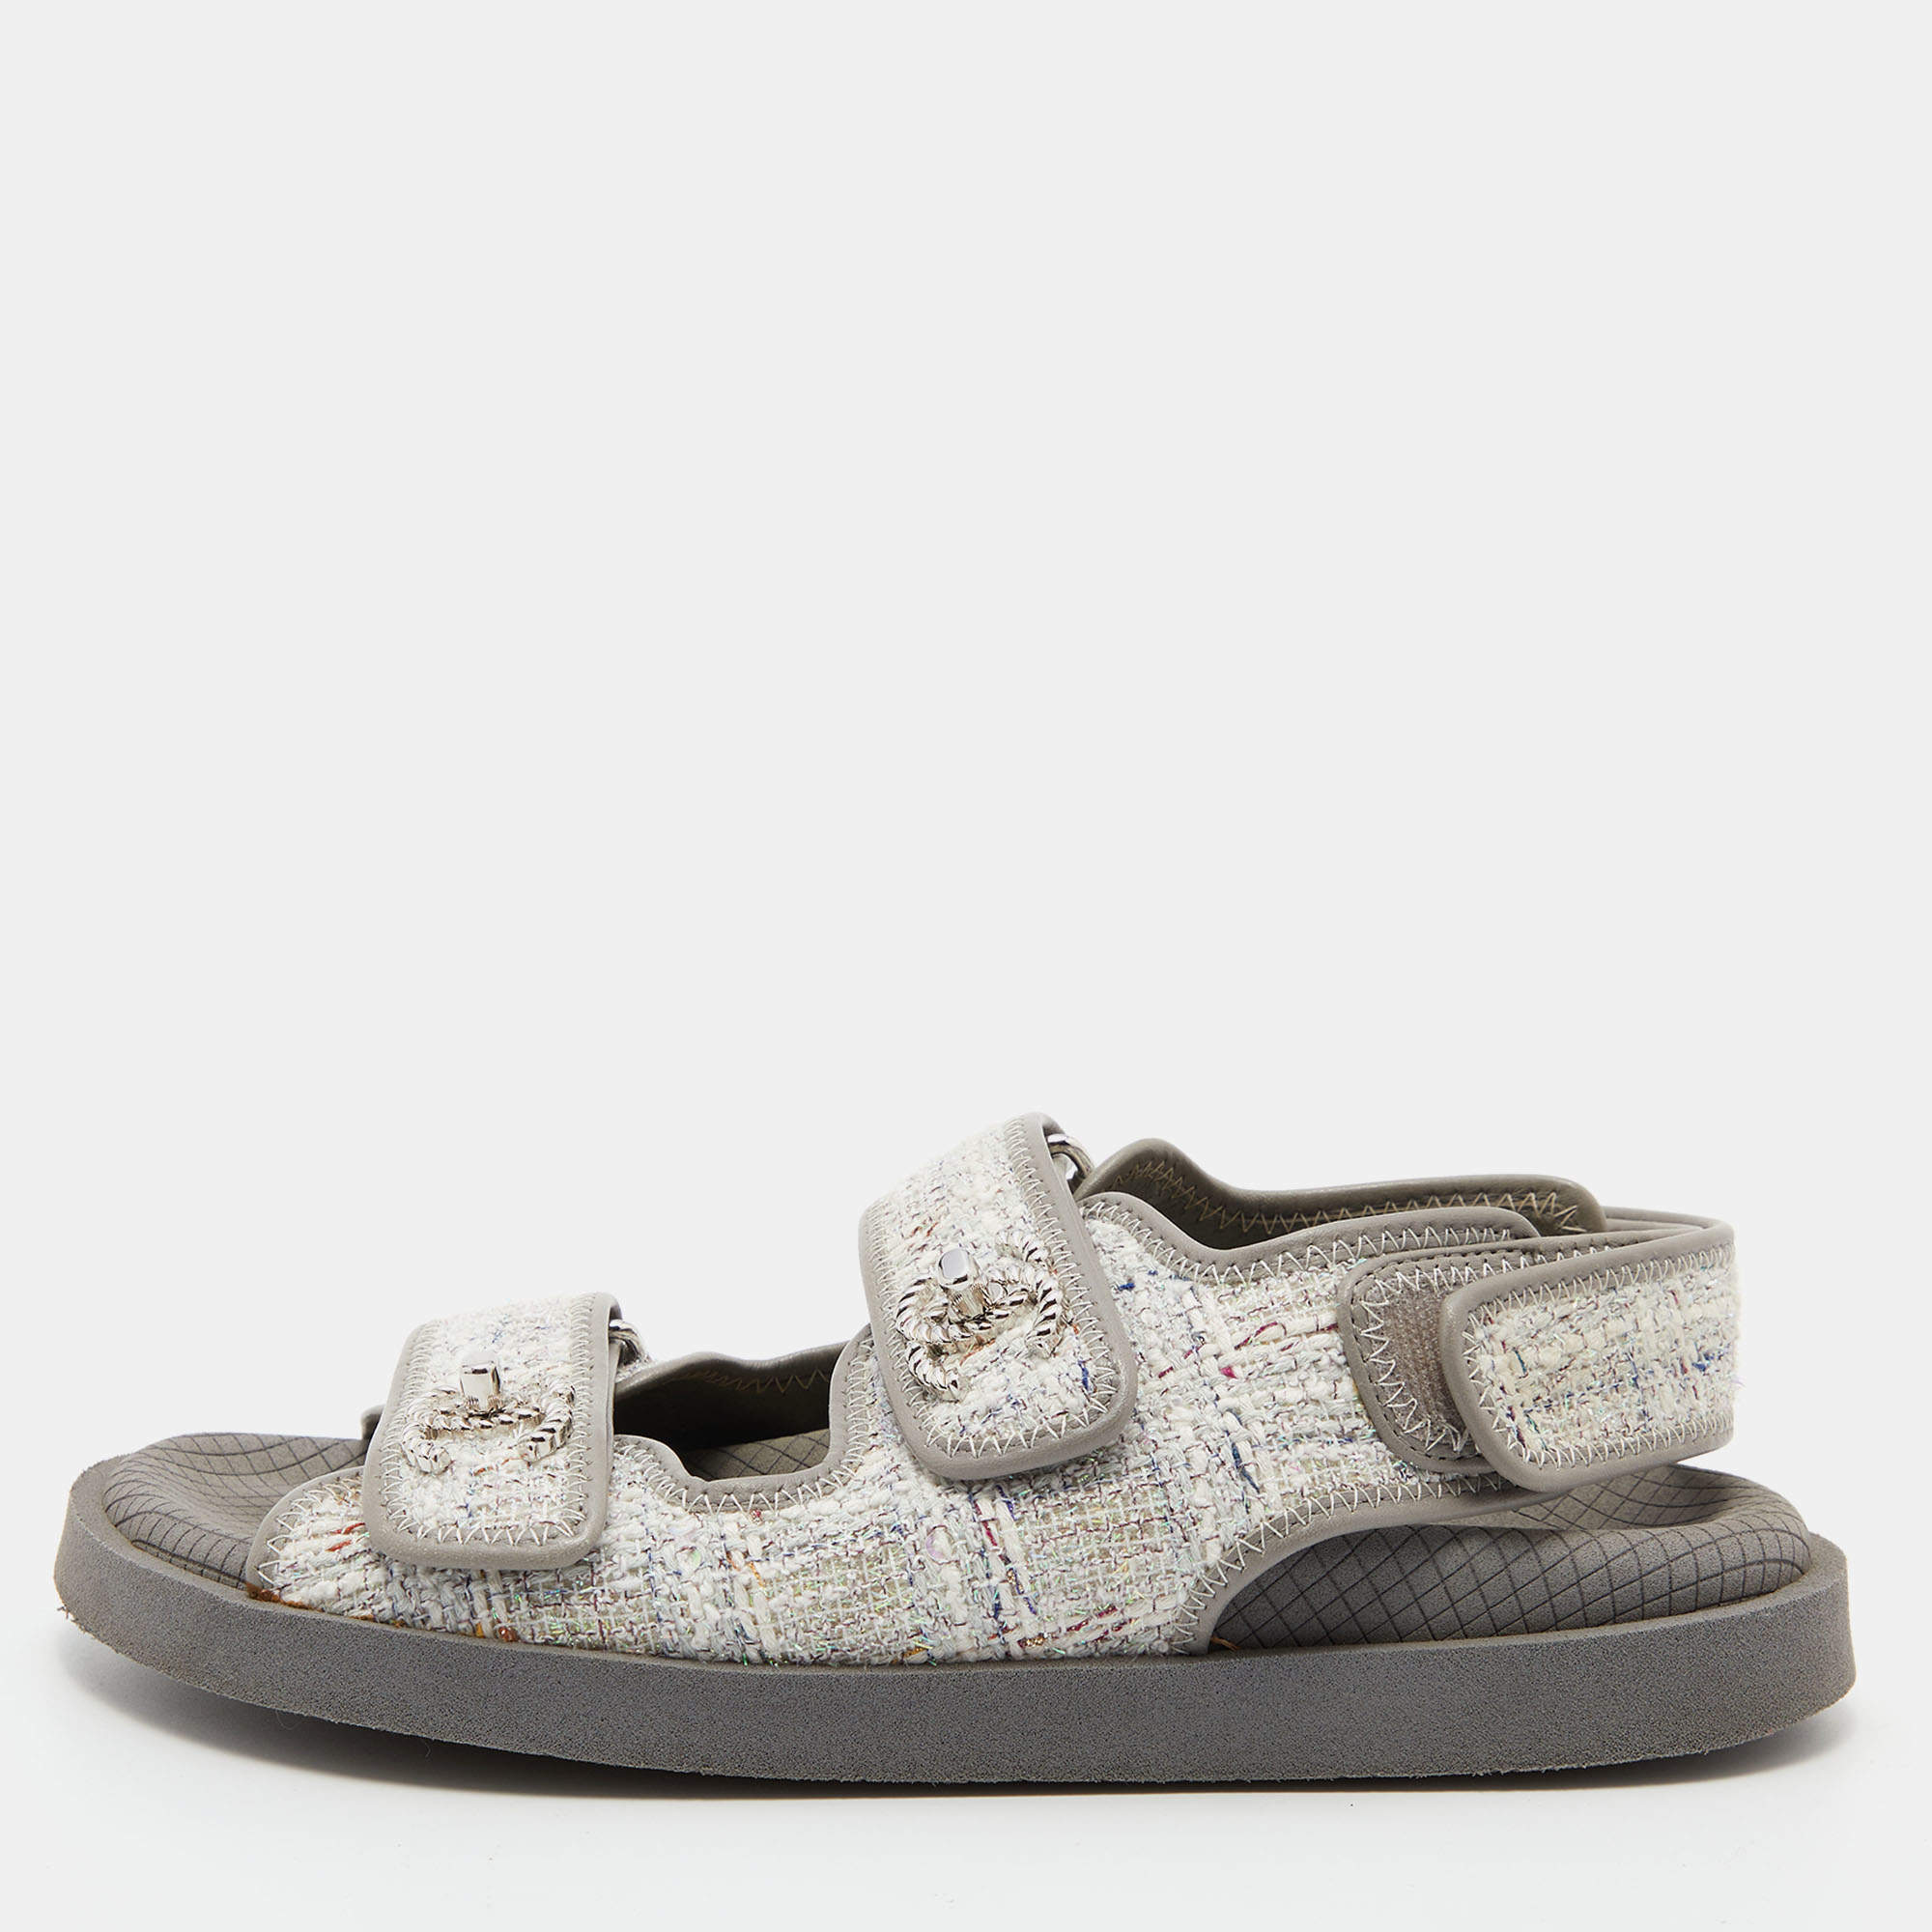 Chanel Grey Tweed and Leather CC Dad Flat Sandals Size 37 Chanel